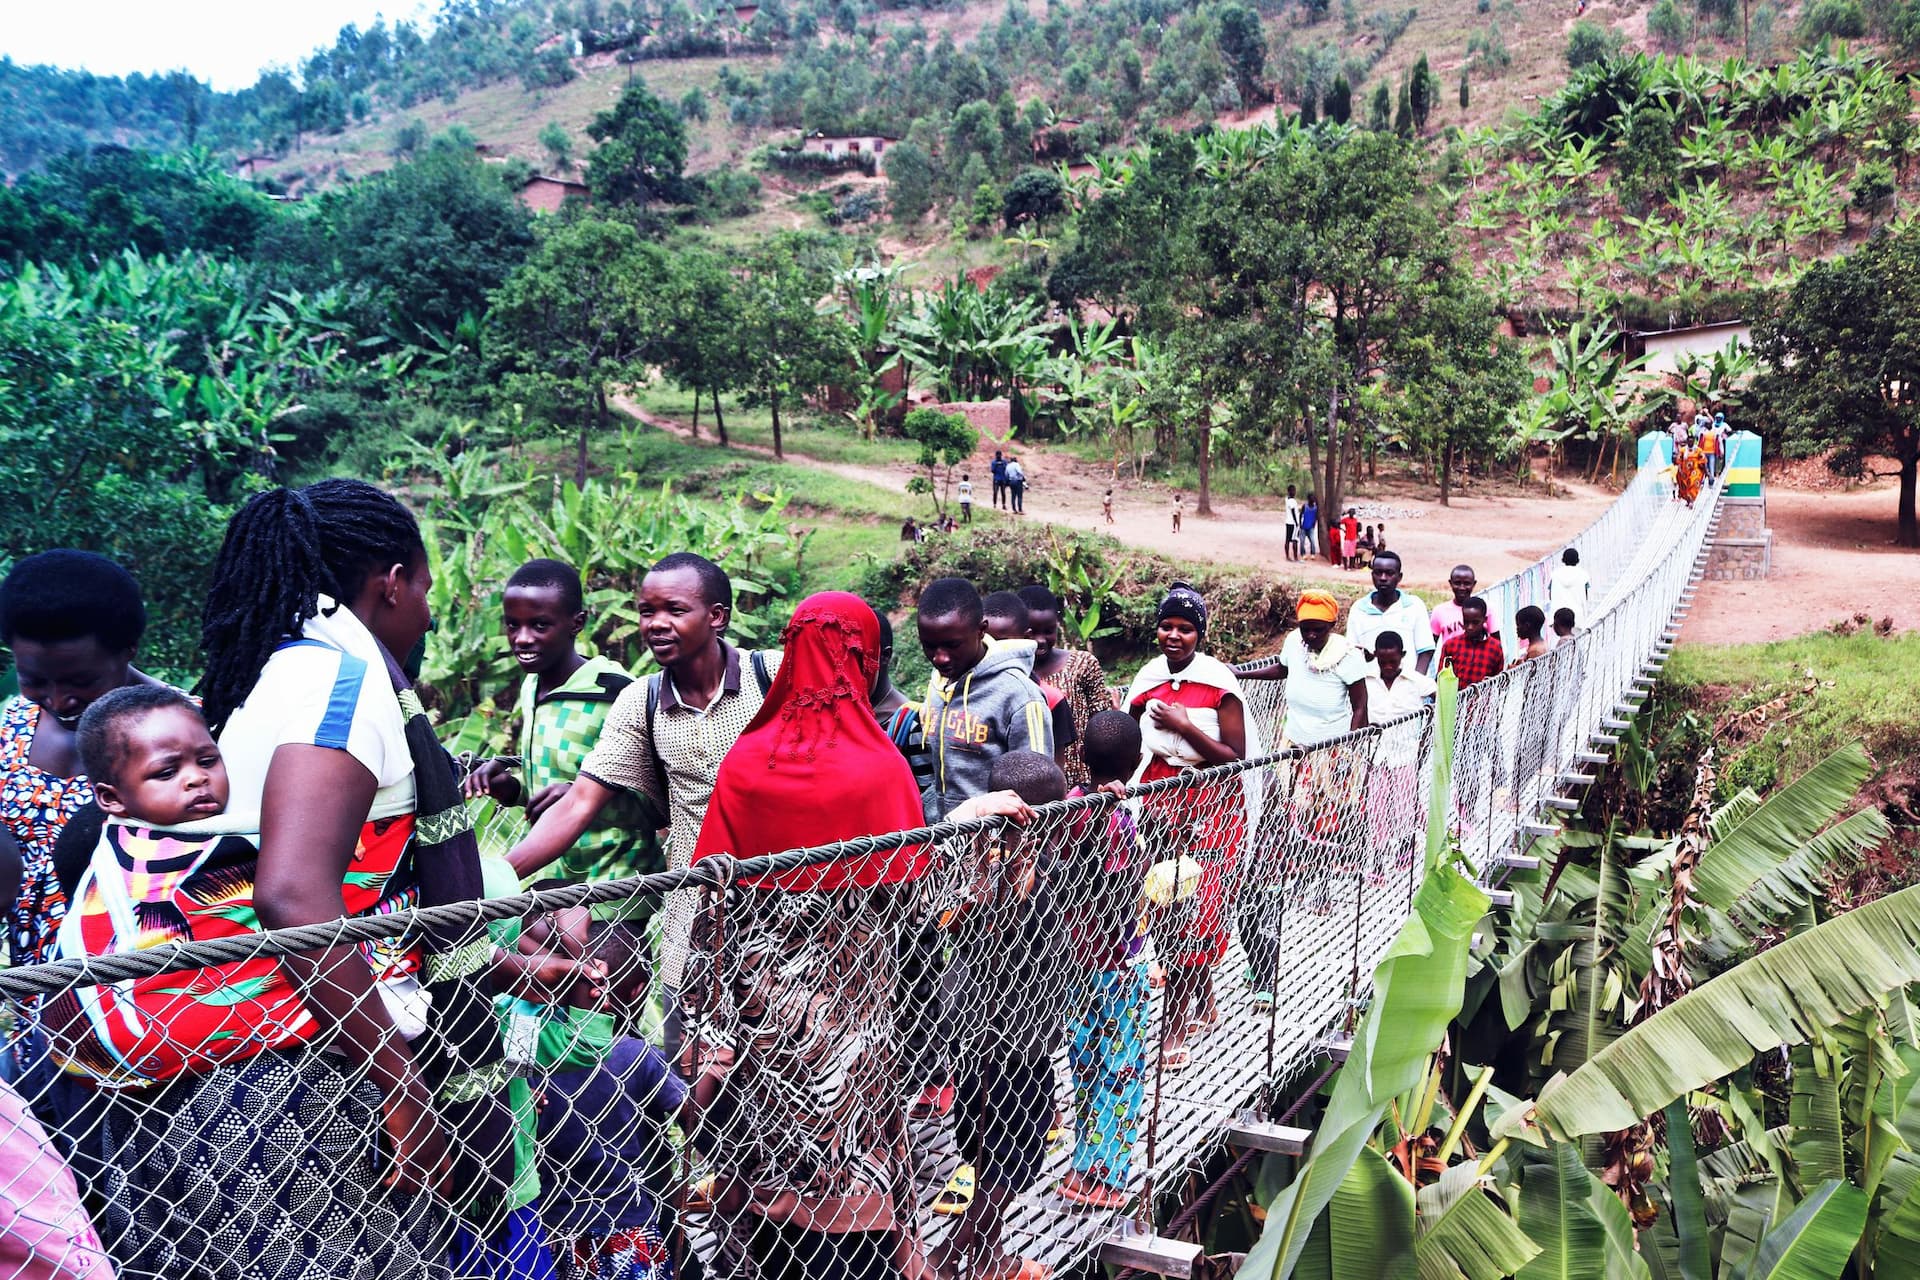 In June 2022, a team of ten volunteers from
Ramboll’s operations across seven countries teamed up with NGO Bridges to Prosperity (B2P) to build the Gikombe Trailbridge.
The 55m bridge provides safe year-round access to vital resources for nearly 4,000 people in the communities of Irebero and Rubete, in Kicukiro, Rwanda